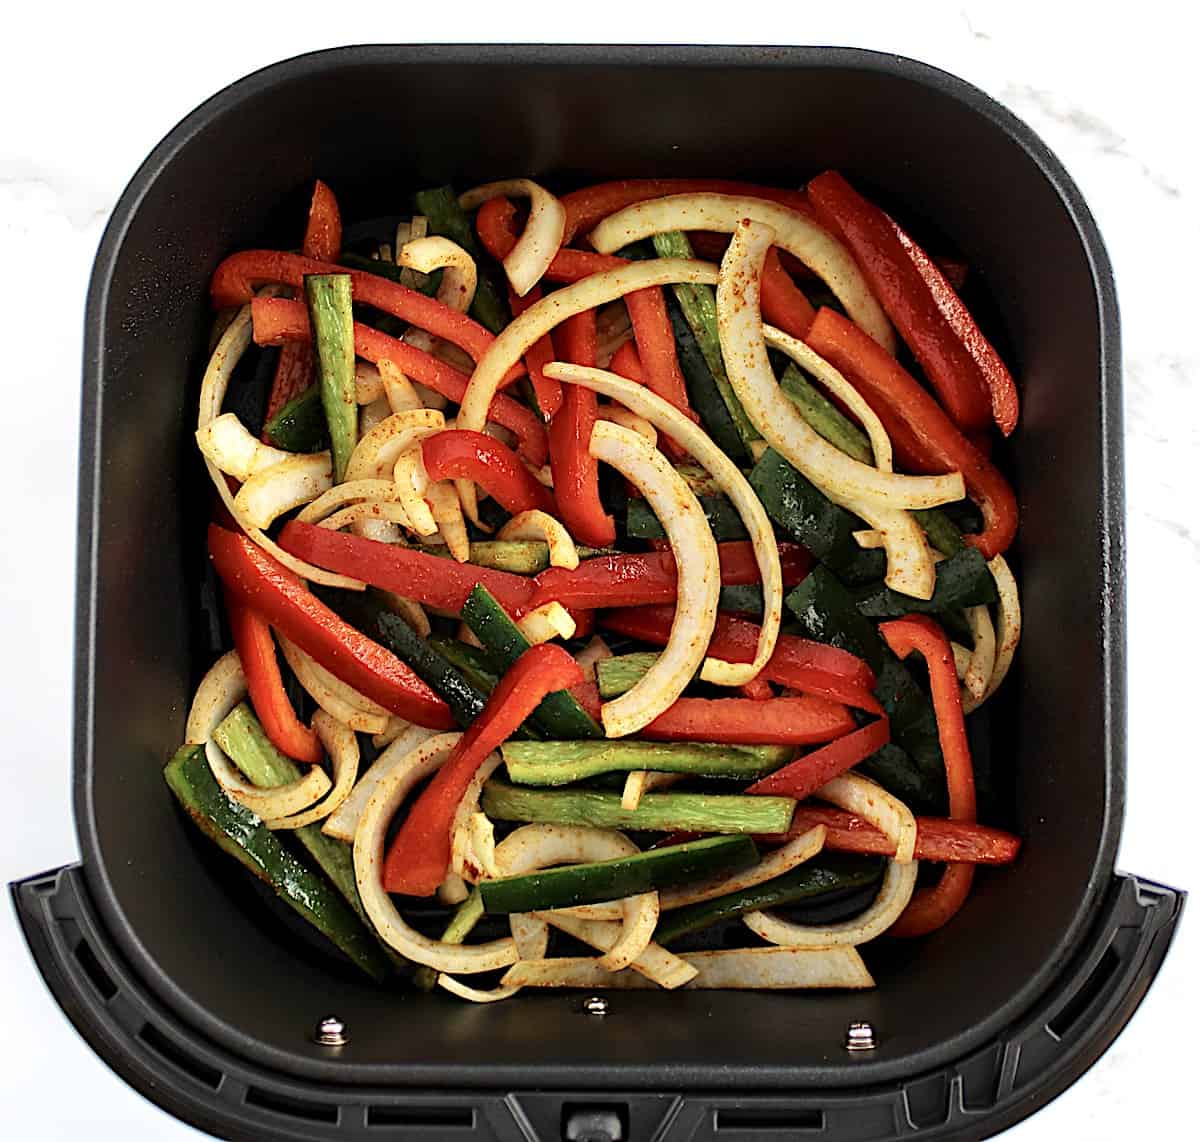 sliced onions, red and green peppers with fajita seasoning in air fryer basket